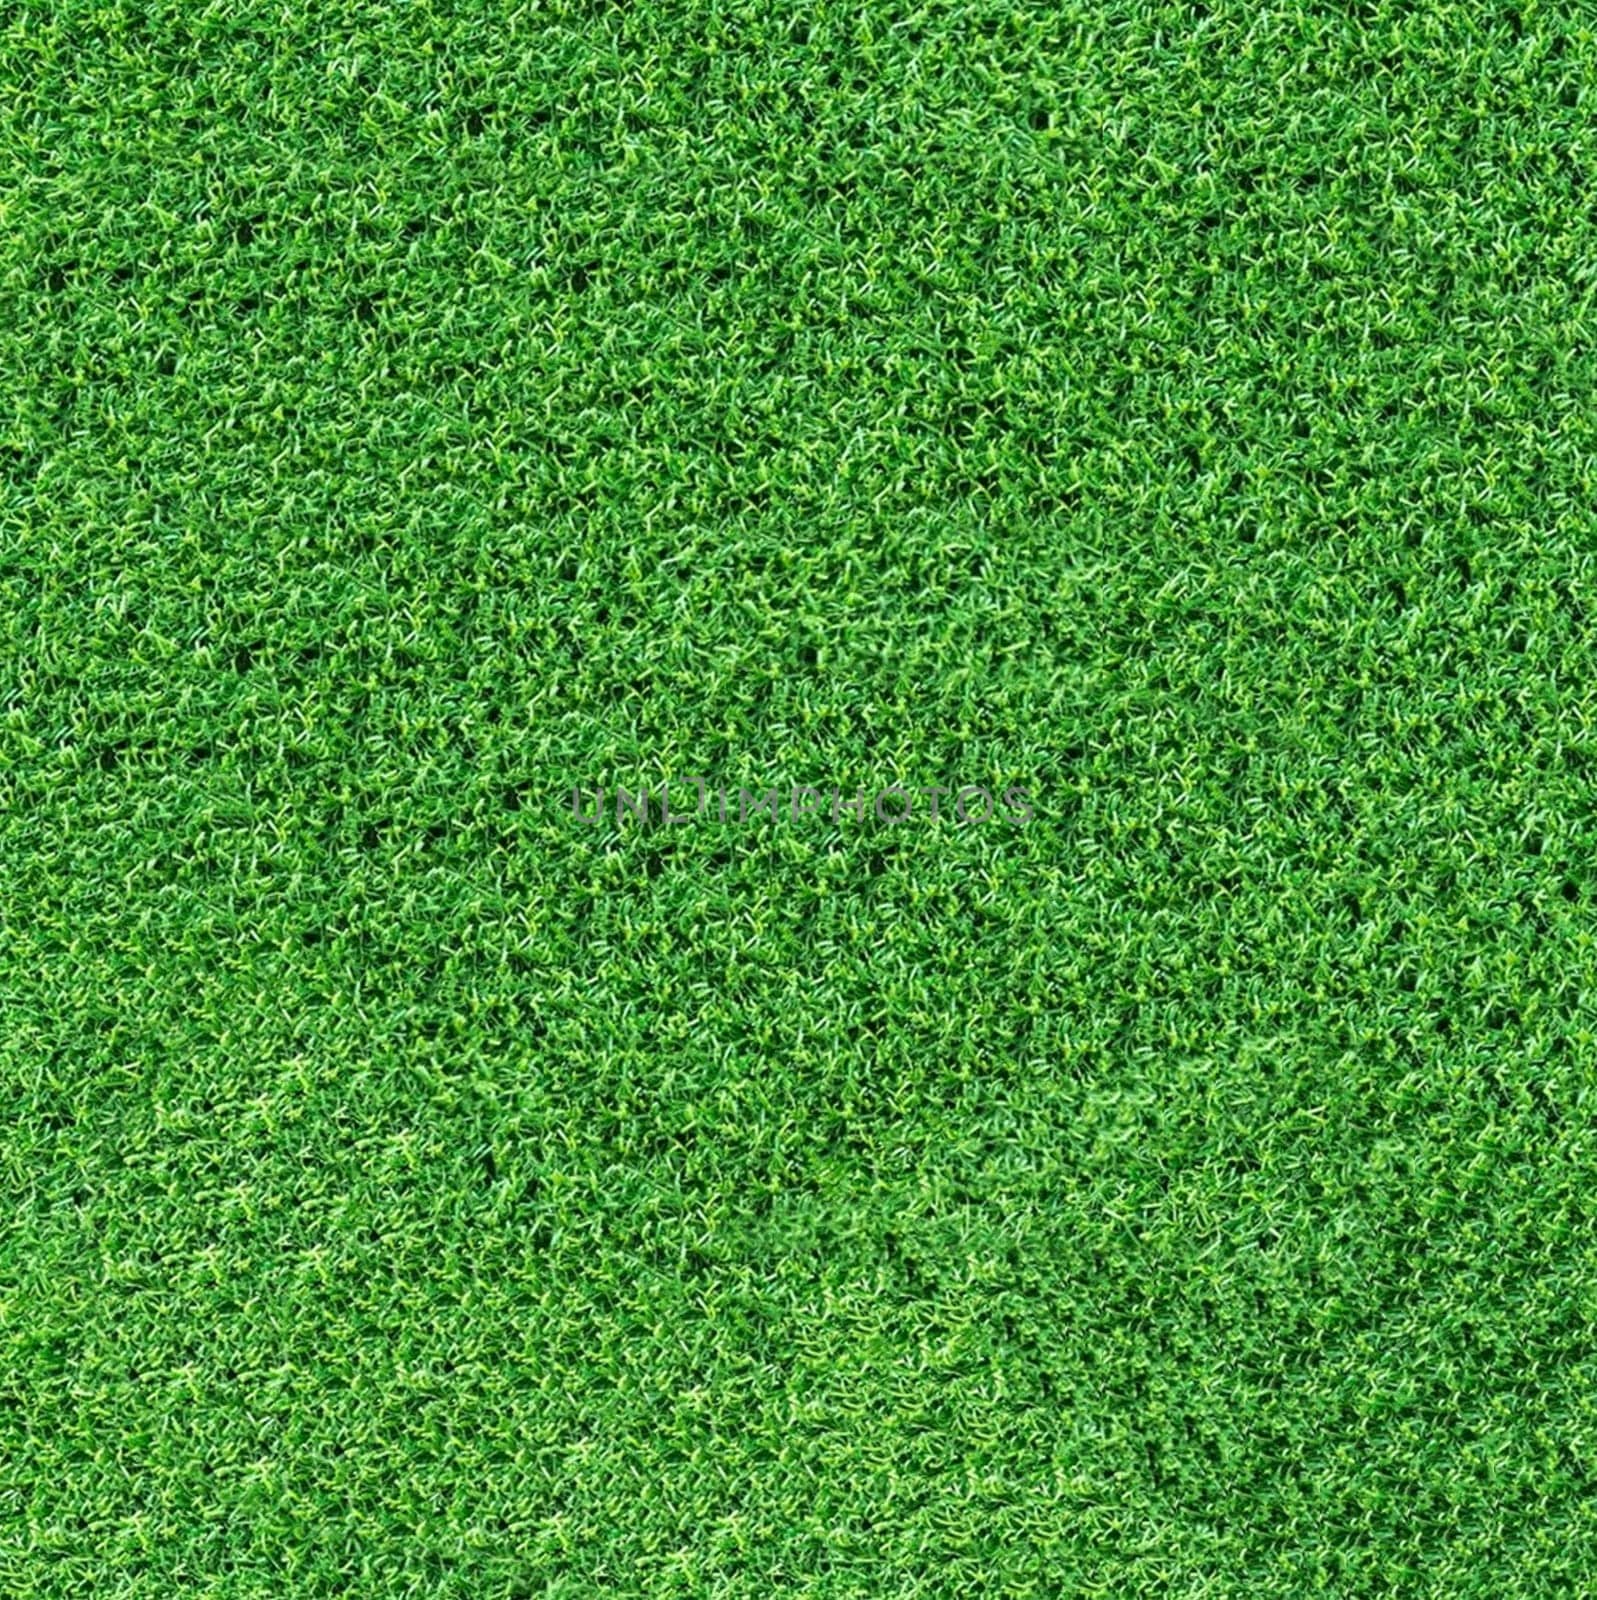 Background texture of short-cropped green grass close-up